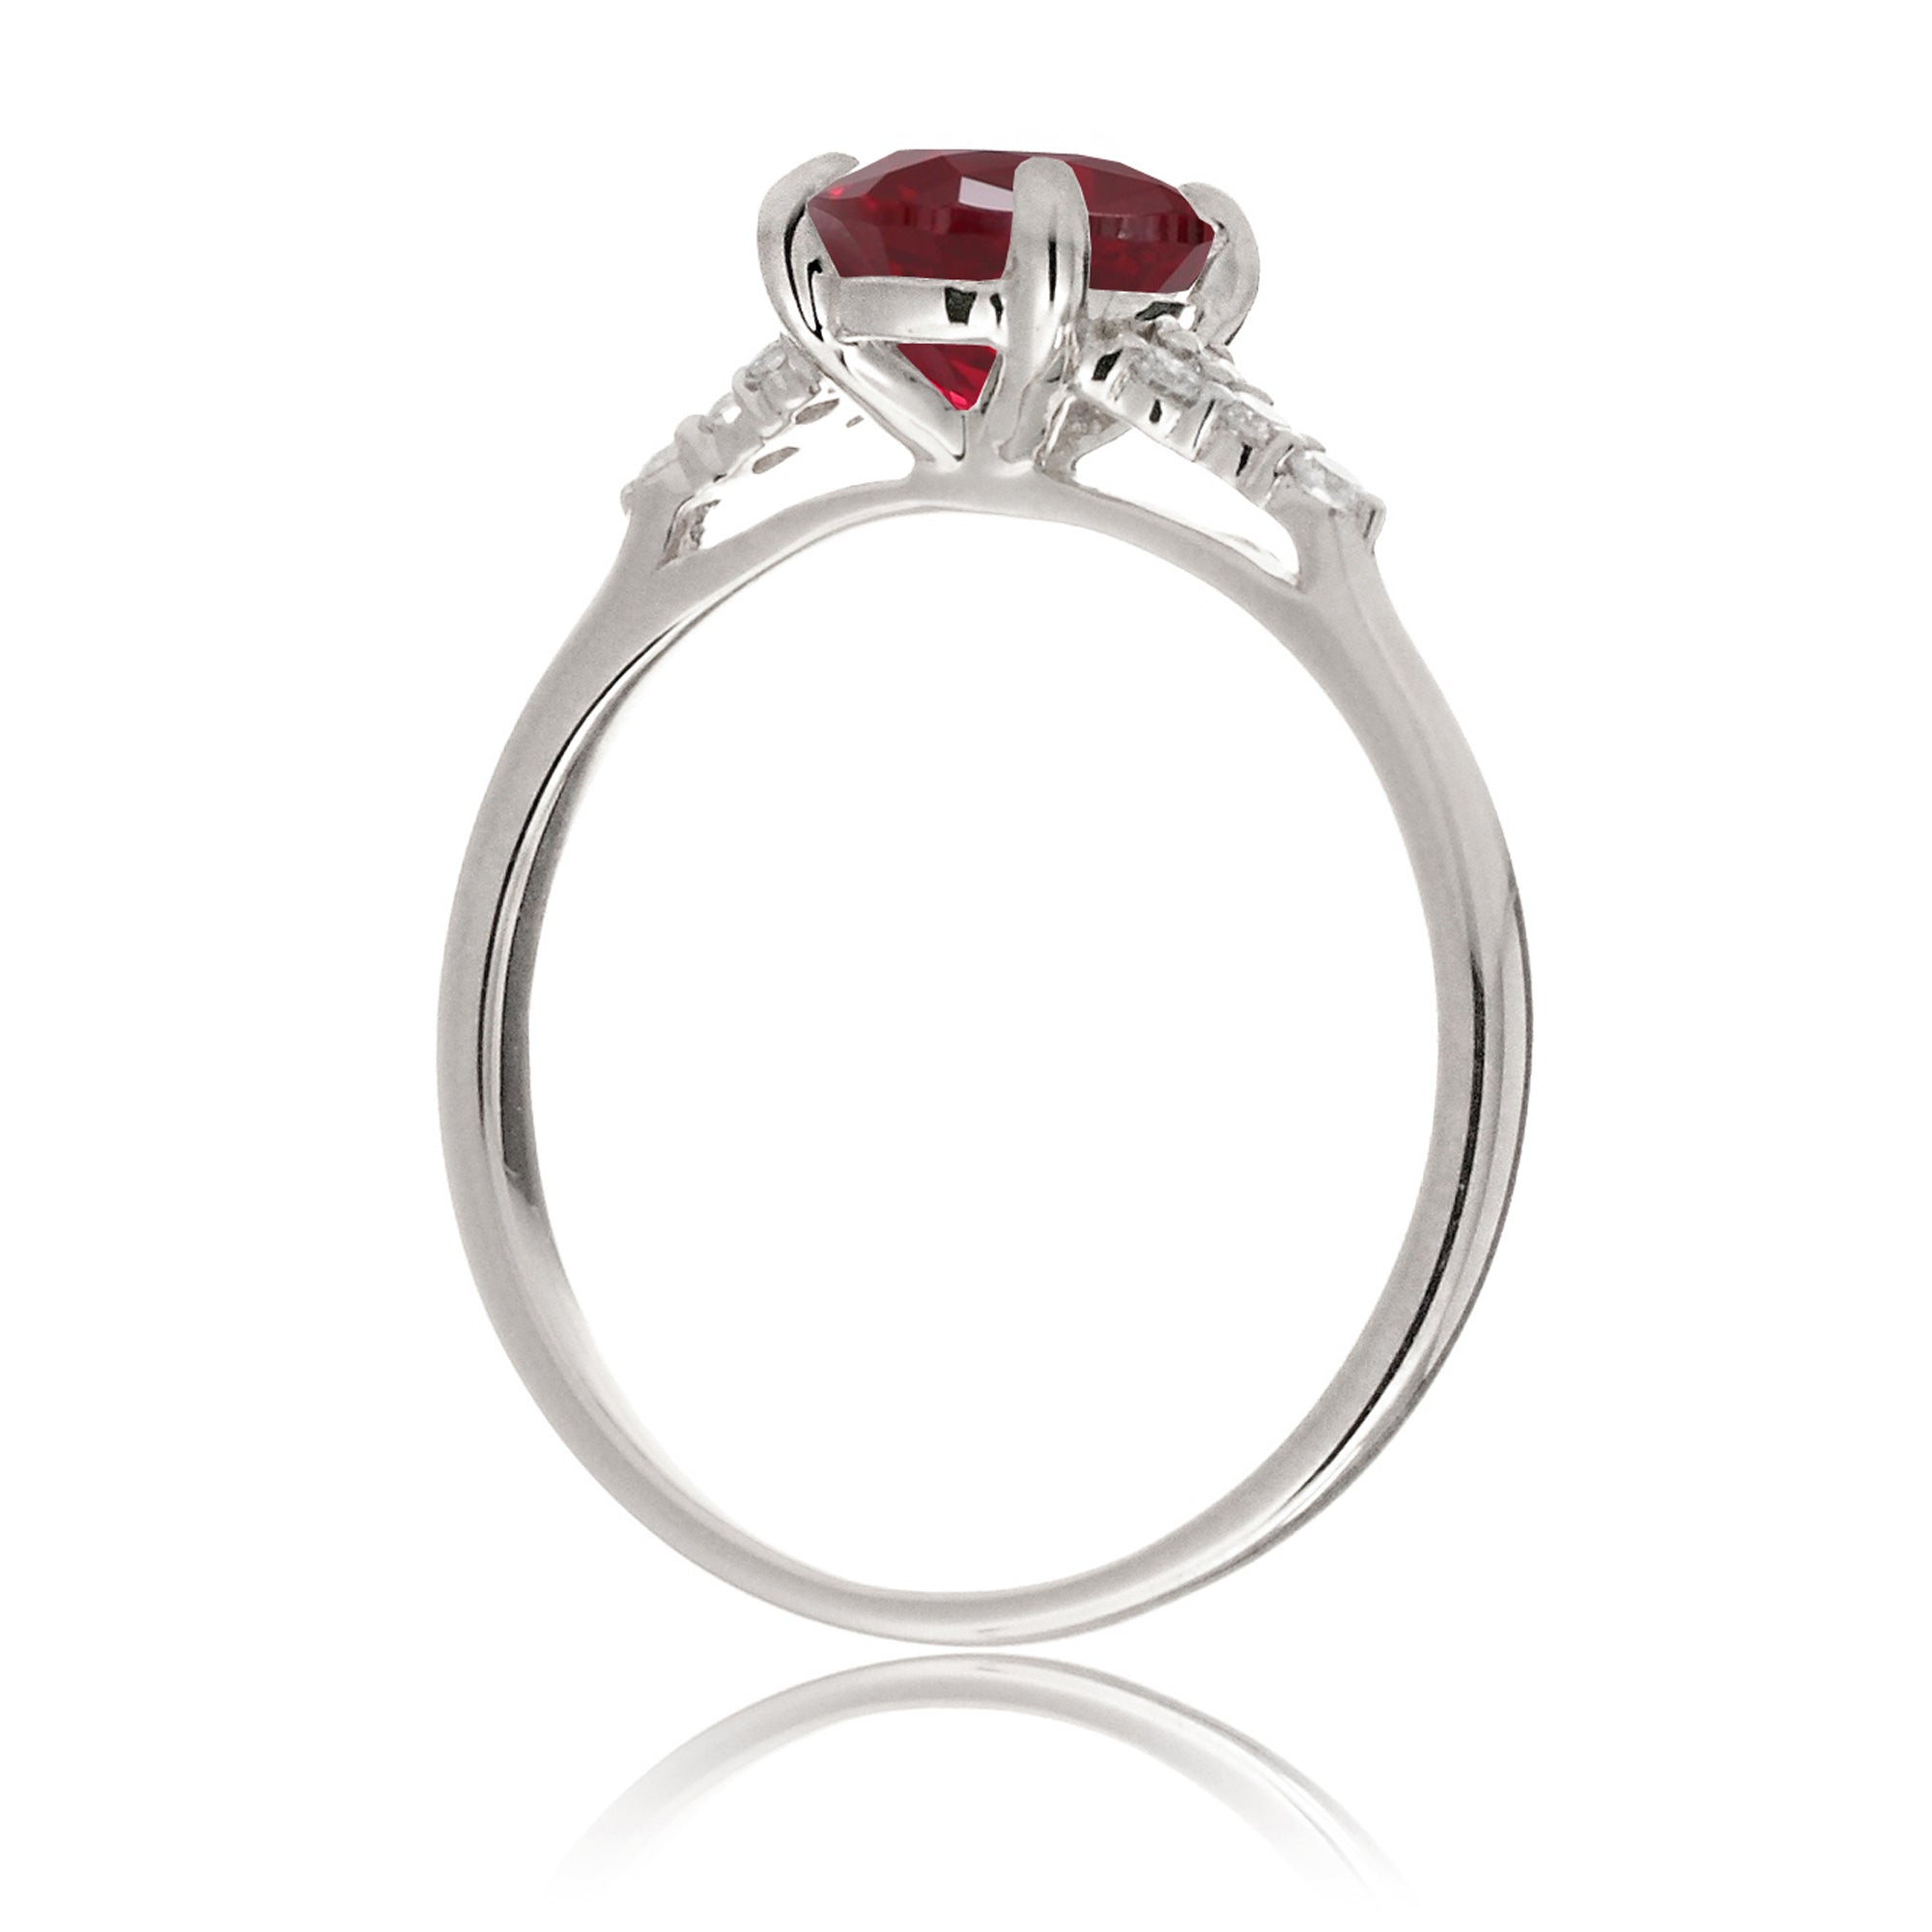 Ruby ring with princess cut and diamond accent in white gold